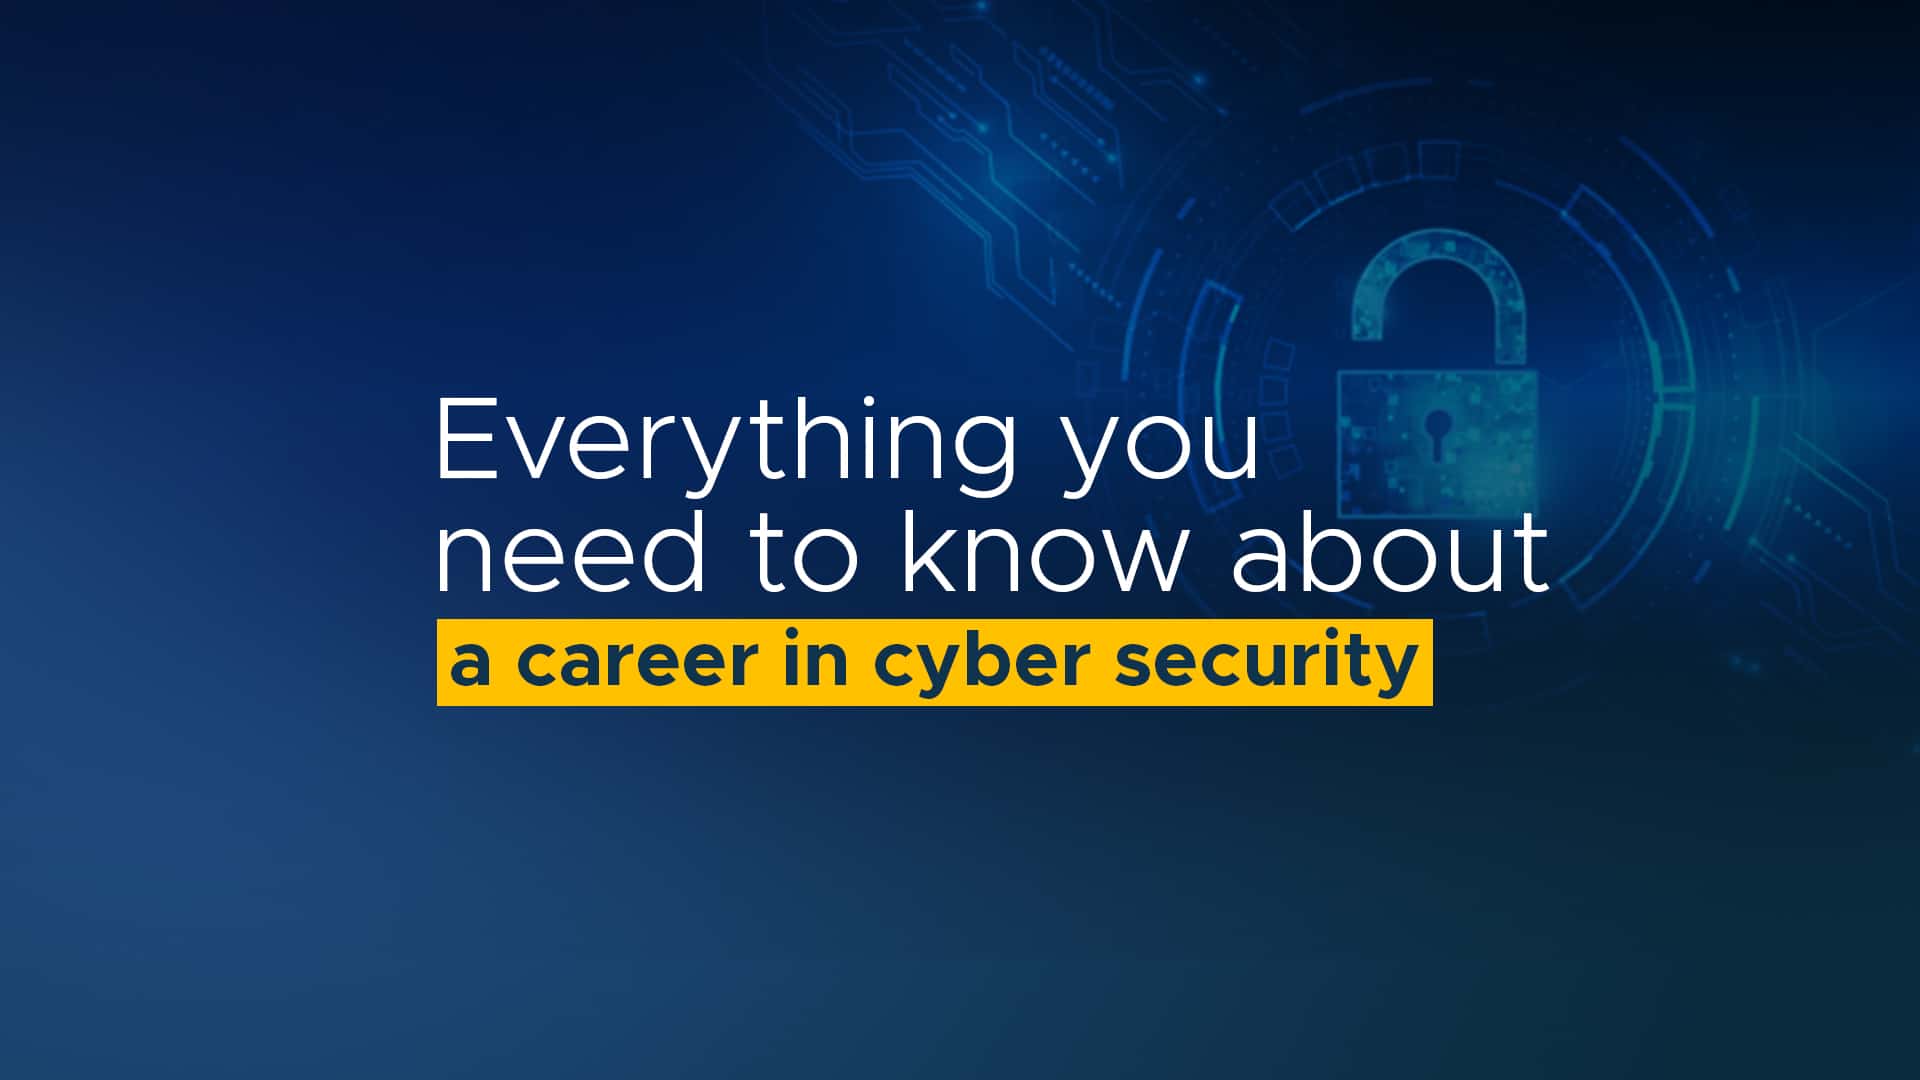 How to build a cyber security career in the evolving digital era?​